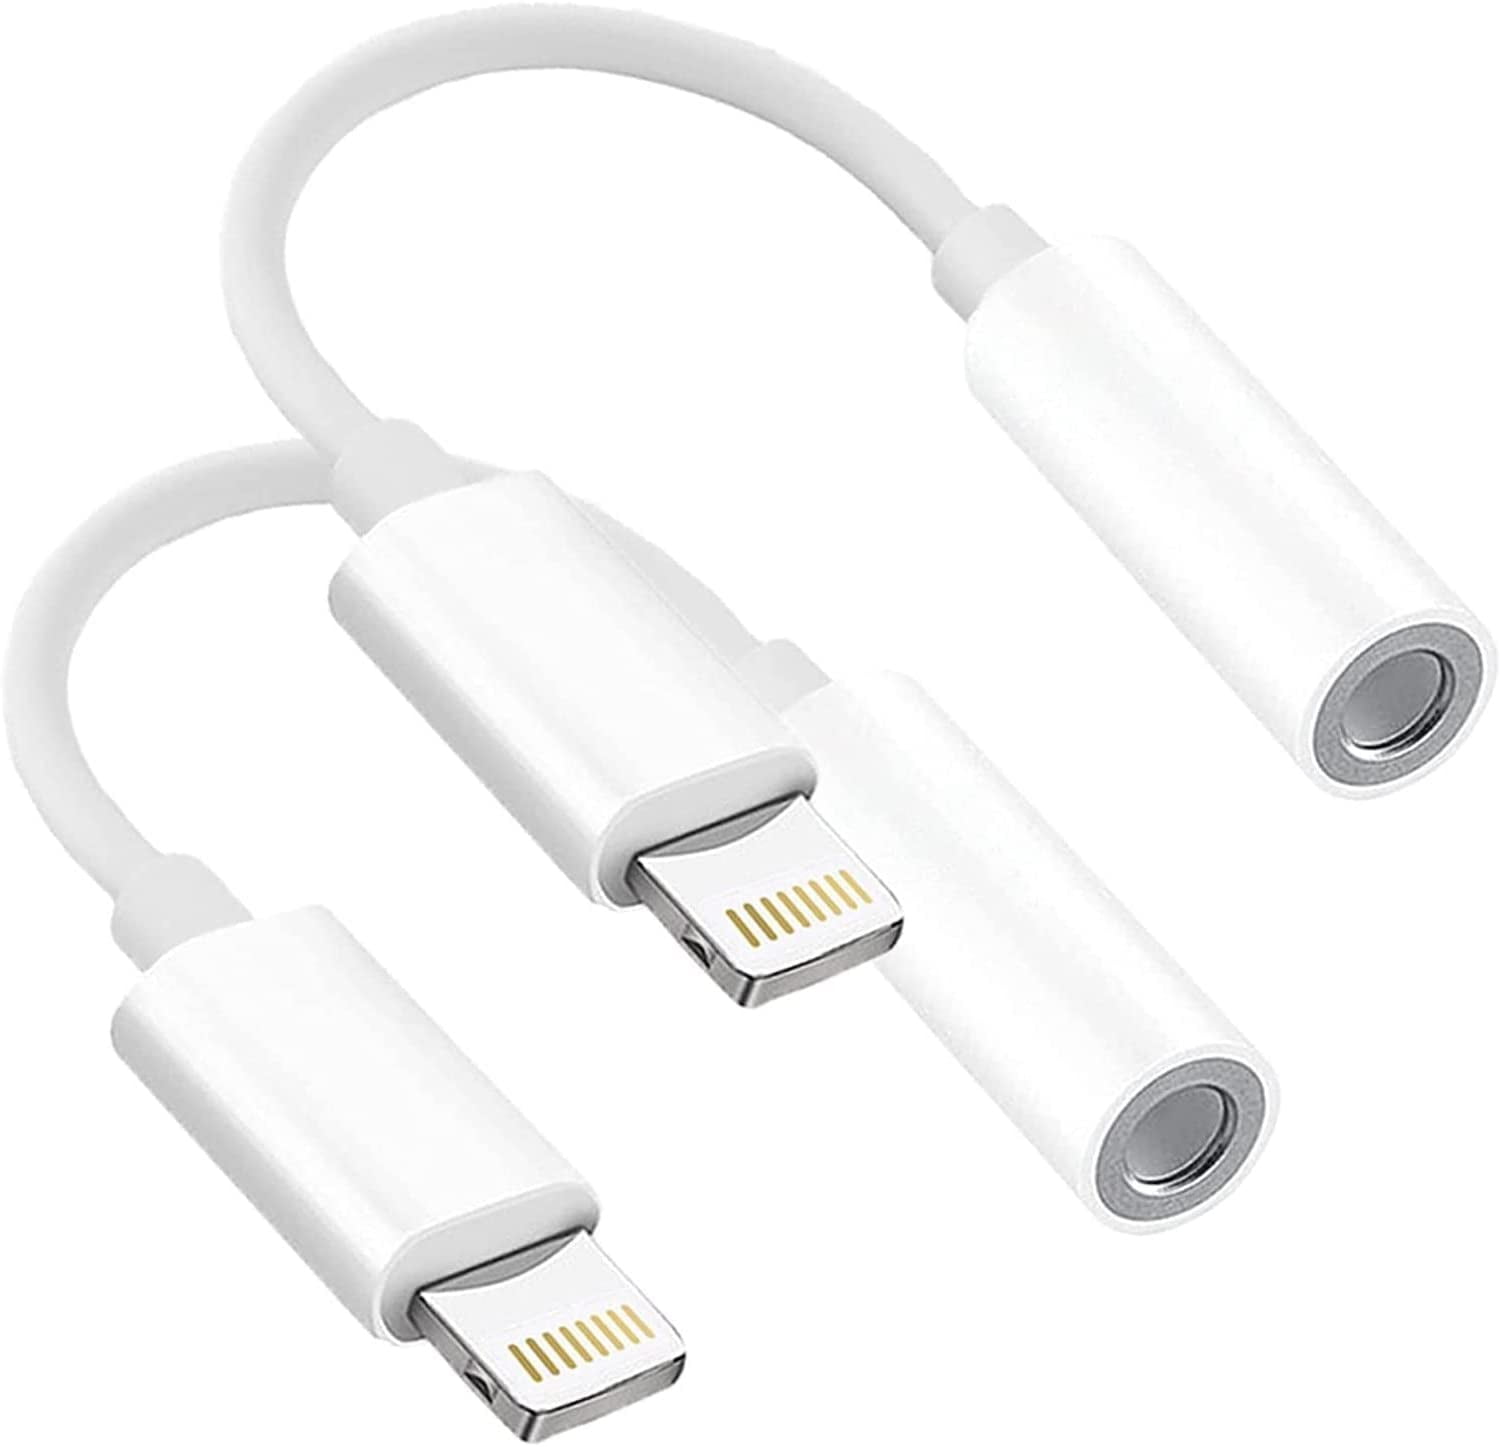 Lightning to 3.5 mm Headphone Jack Adapter, [Apple MFi Certified] 3 Pack  iPhone 3.5mm Headphones/Earphones Aux Audio Dongle Adapter Compatible for  14